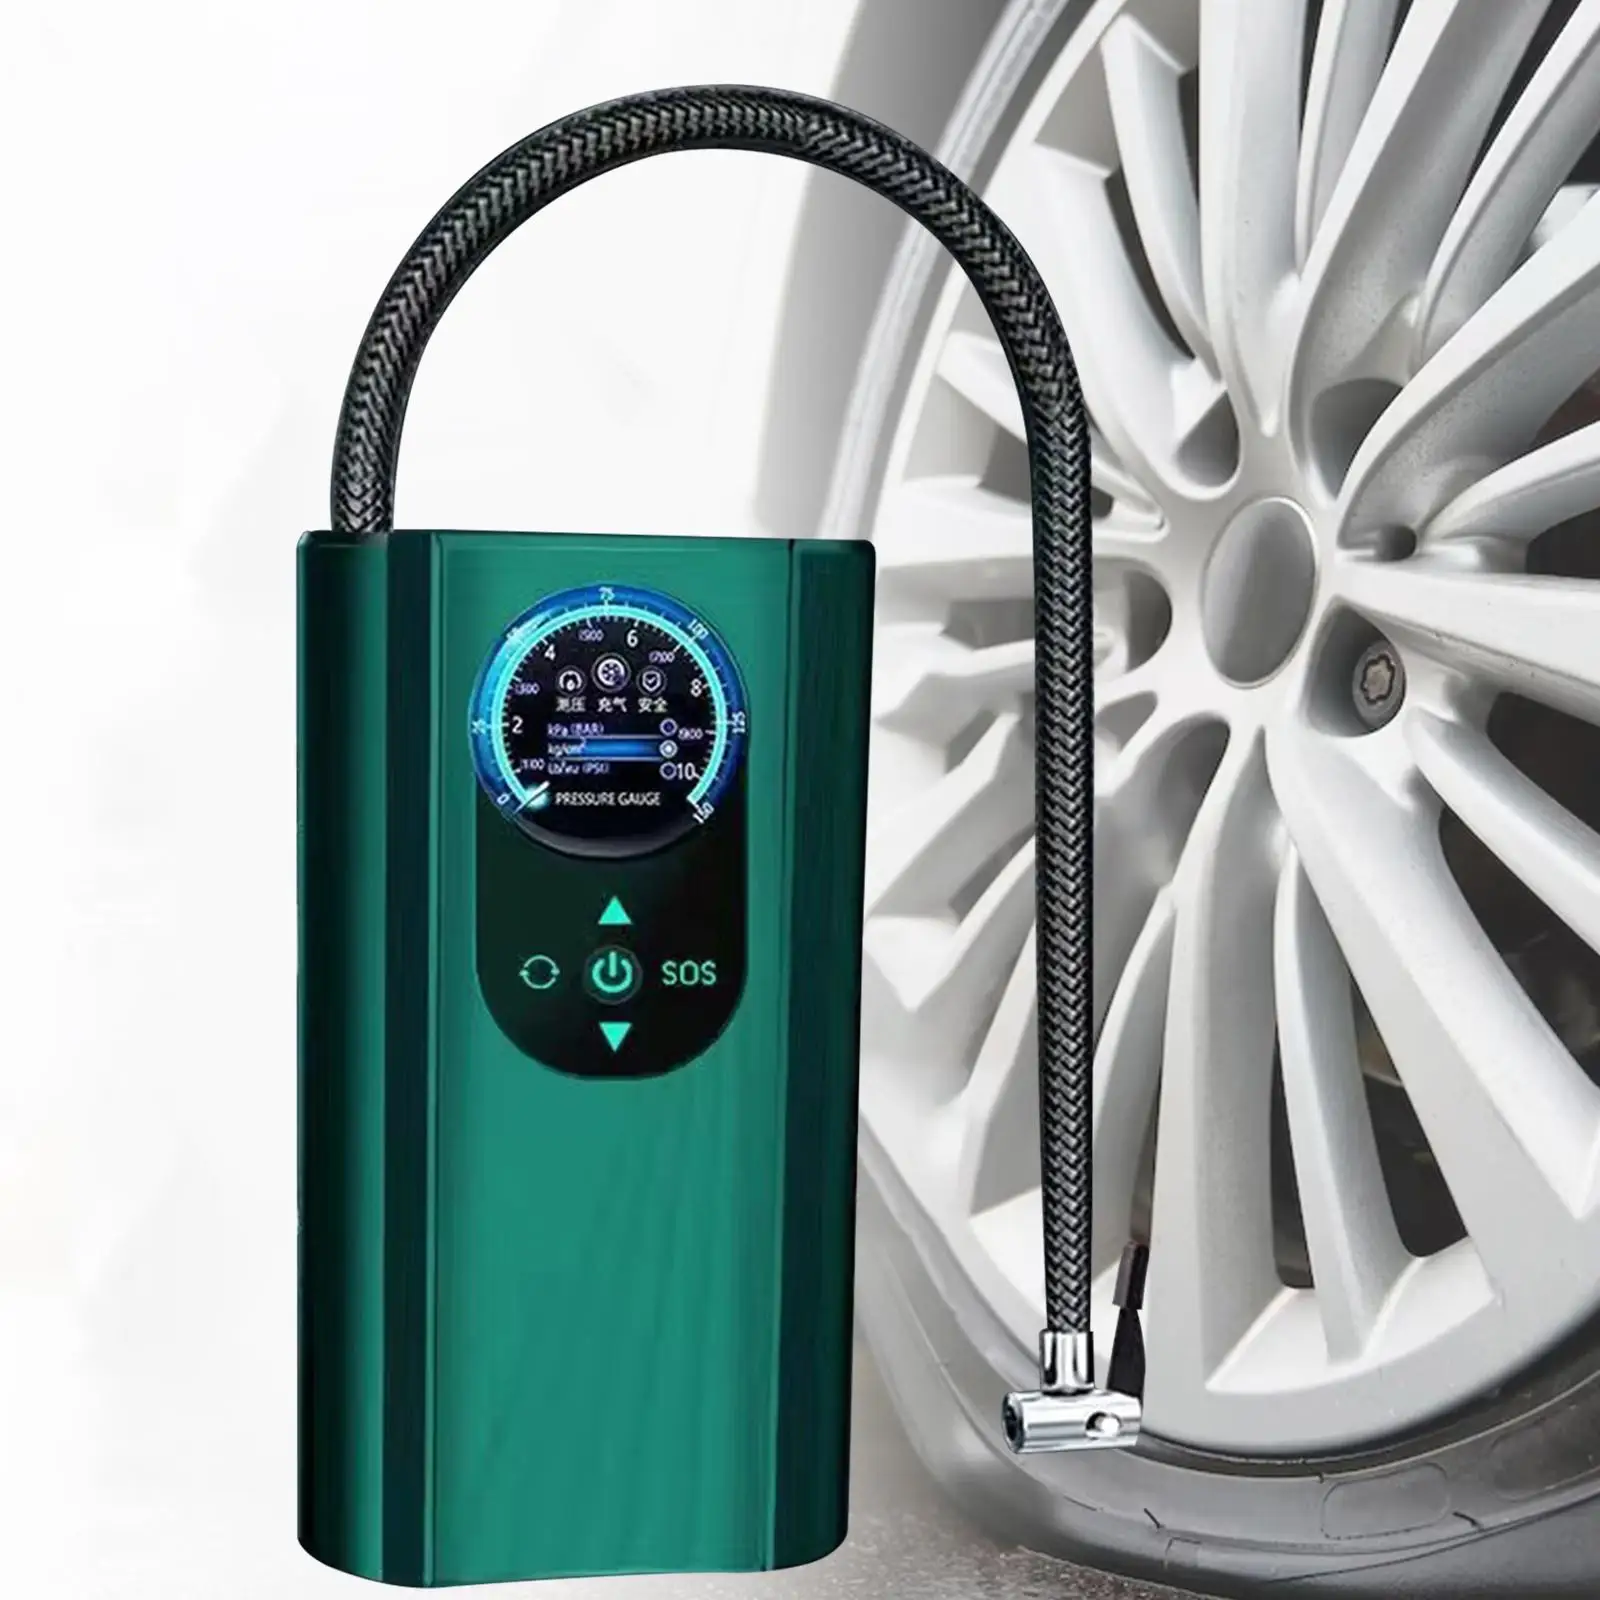 Portable Air Compressor Handheld Mini with Pressure Gauge Compact Electric Tire Pump for Bicycle Bike Car Ball Motorcycle